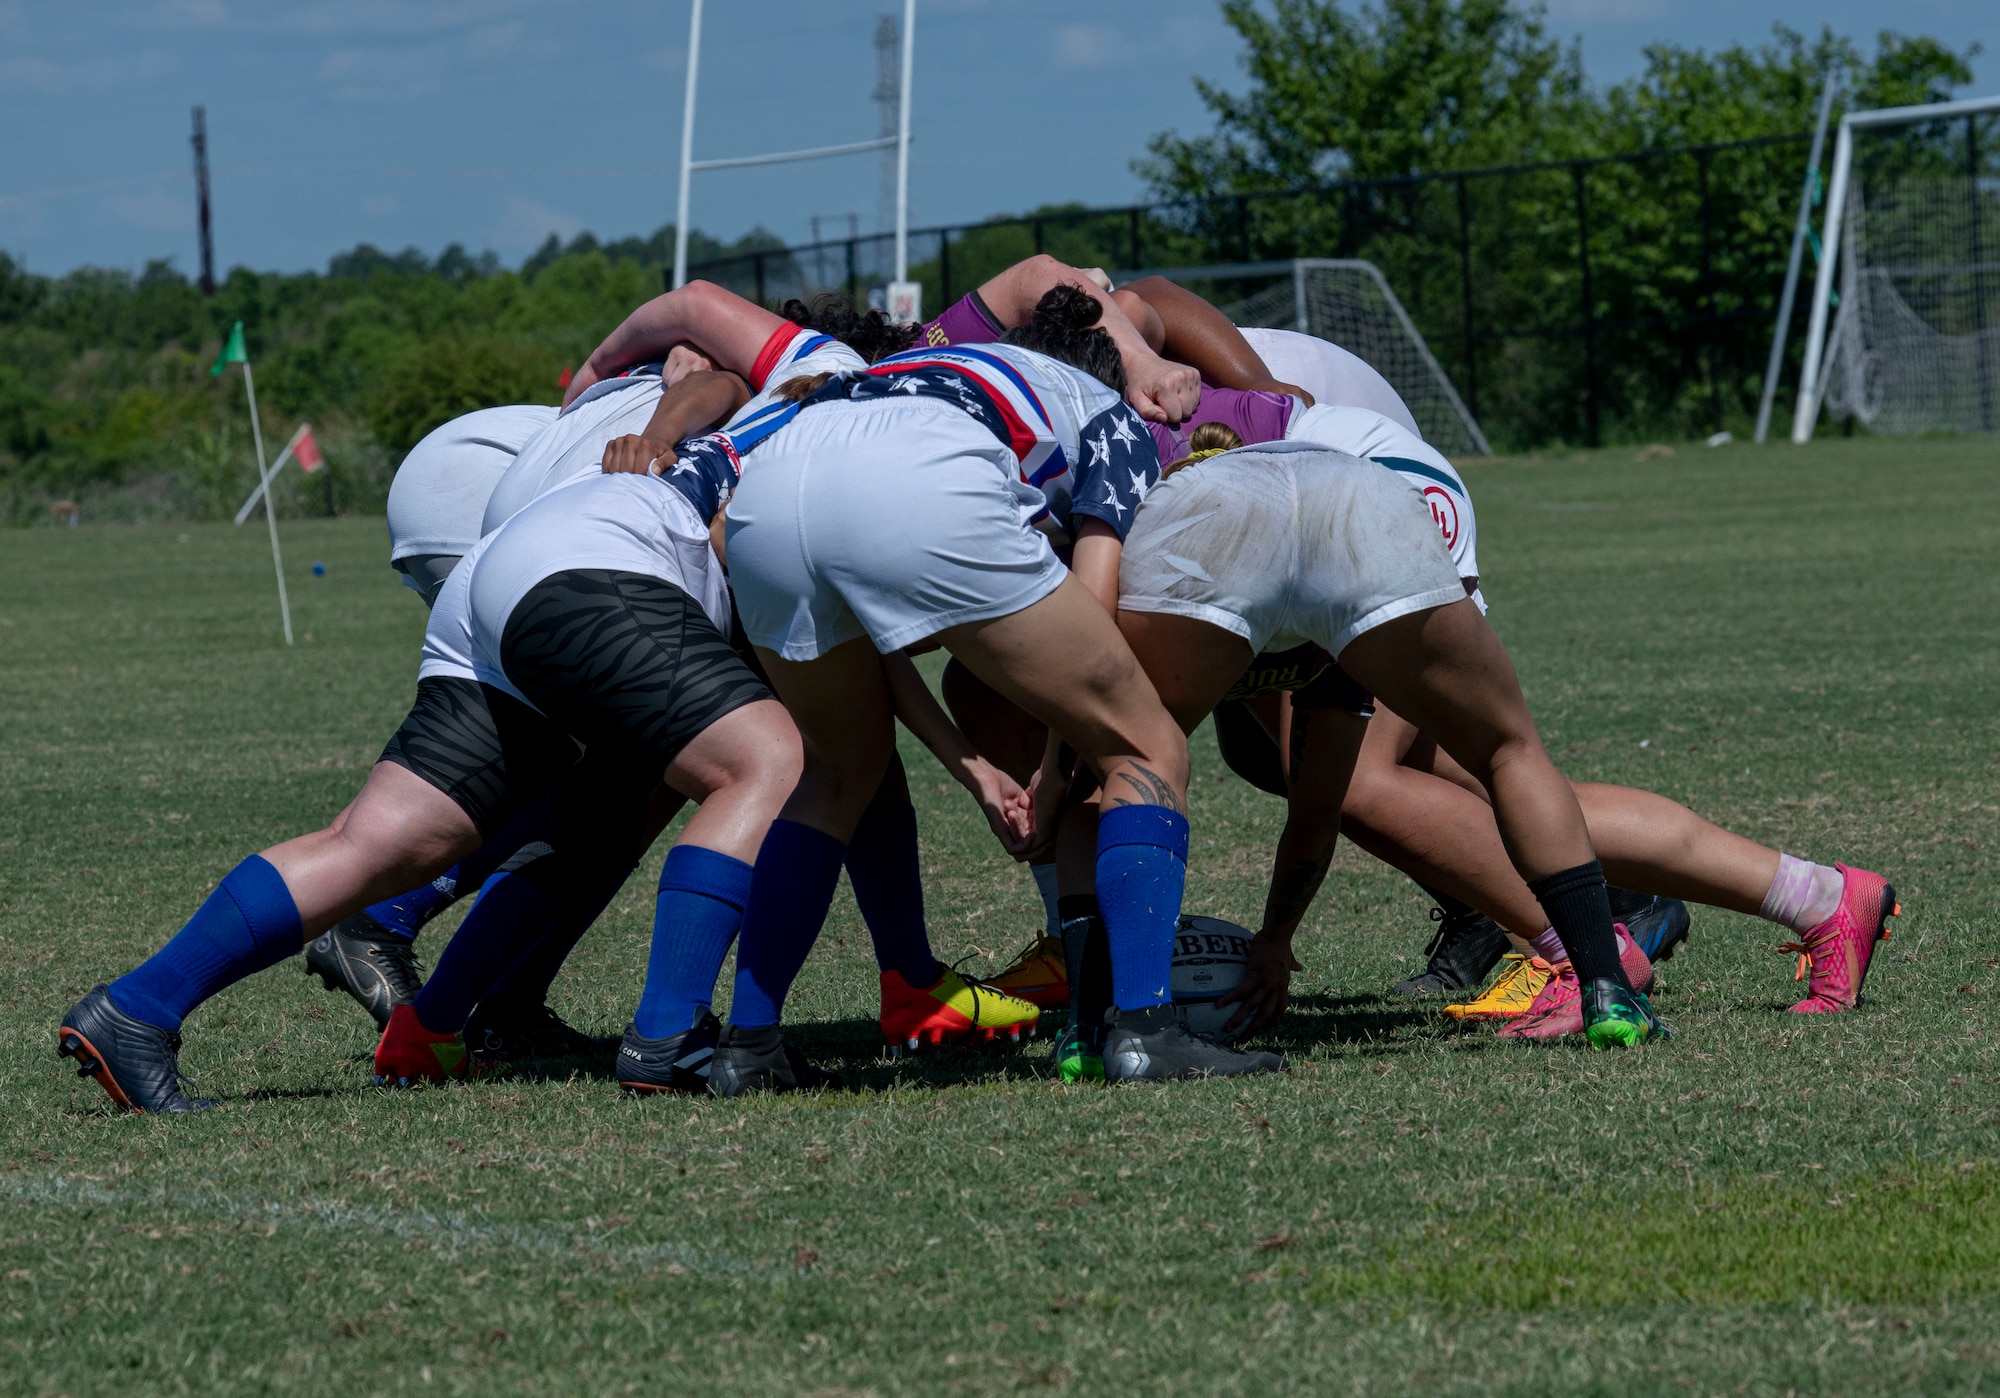 Members of the Department of Air Force Women's Rugby Team form a scrum, where players bind together and shove against each other to retrieve the ball, during a game against the Northern Virginia Rugby Team after competing in the Annual Armed Forces Women’s Rugby Championship in Wilmington, North Carolina, June 26, 2022. The competition played rugby sevens, which means every team was made up of seven players playing 7-minute halves. (U.S. Air Force photo by Airman 1st Class Sabrina Fuller)